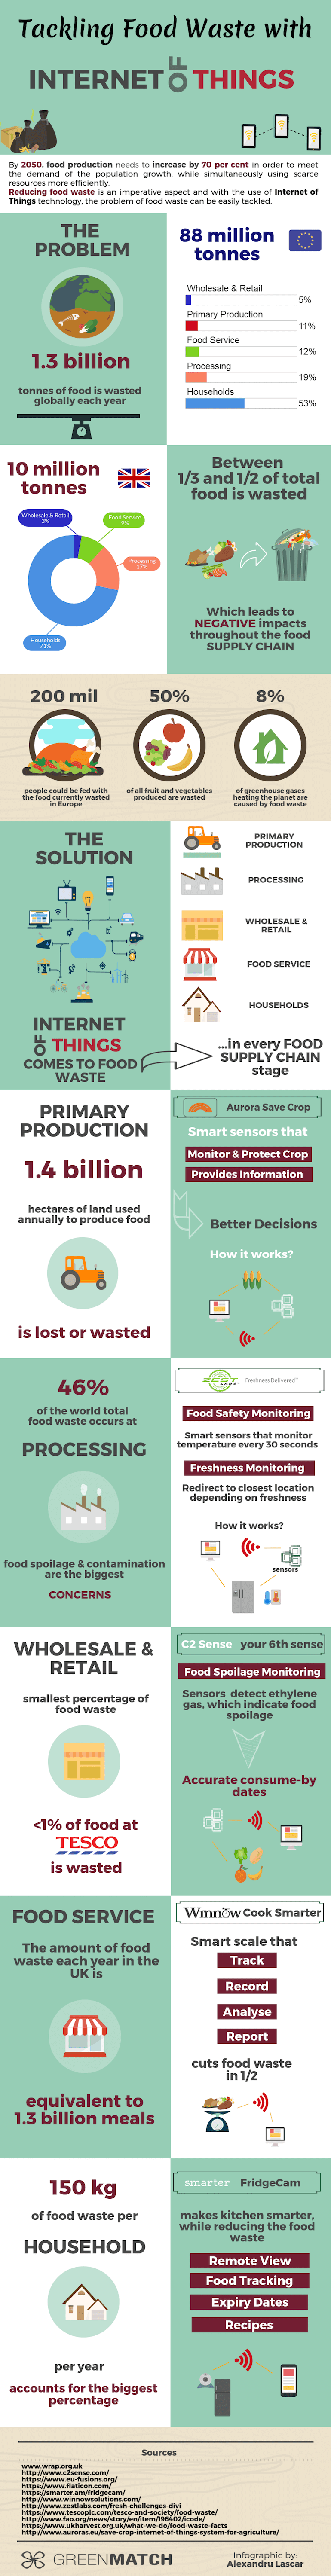 Infographic about tackling food waste with IoT